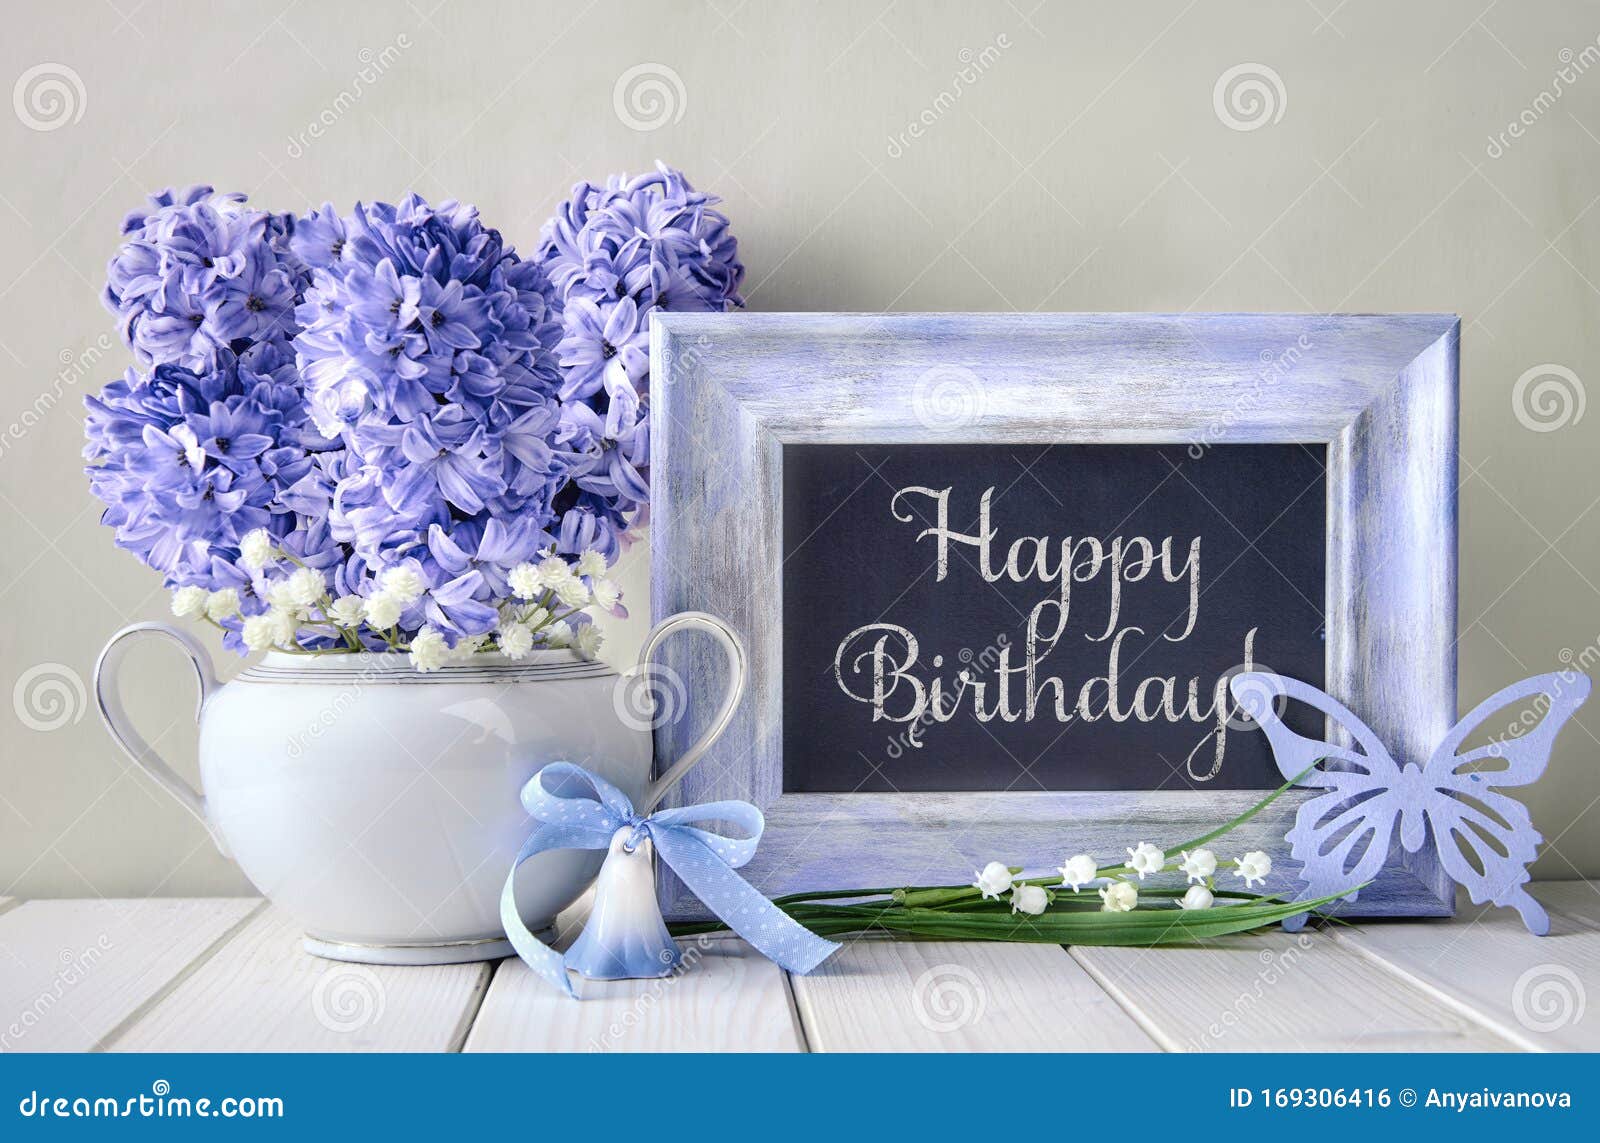 Blue Decorations and Hyacinth Flowers on White Table, Blackboard ...